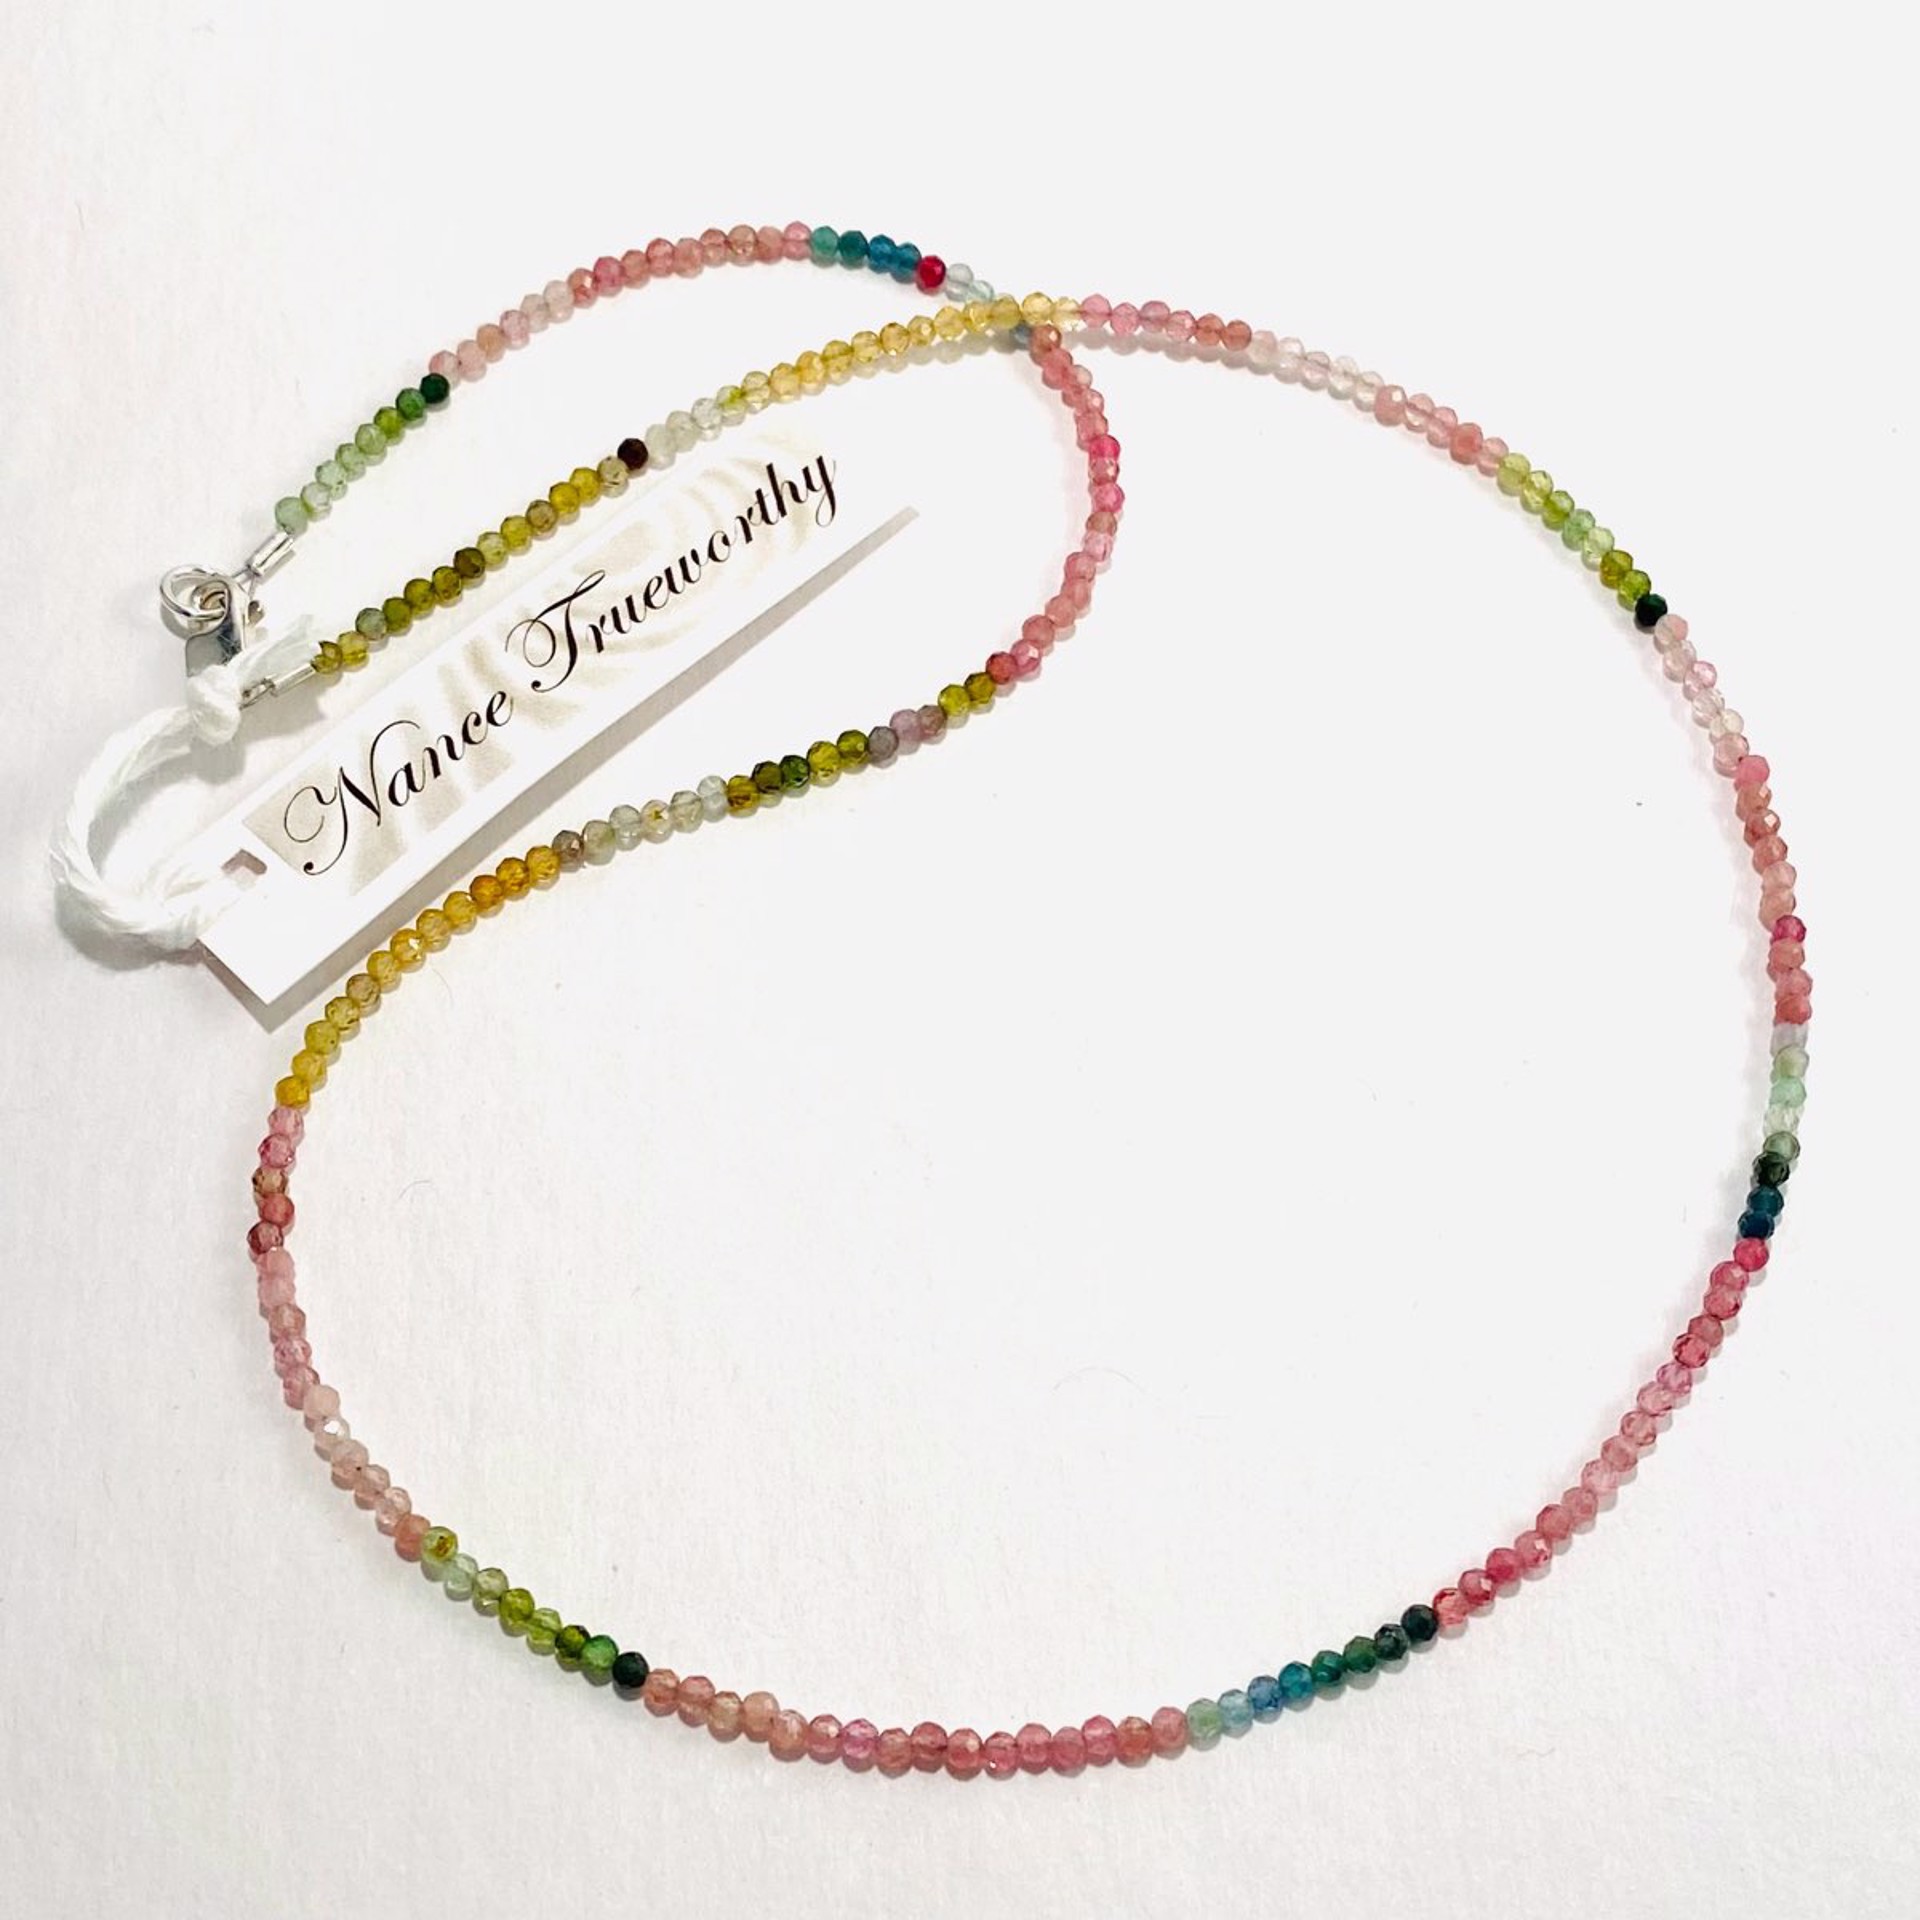 NT22-249 Faceted Multi Color Tourmaline Strand Necklace by Nance Trueworthy